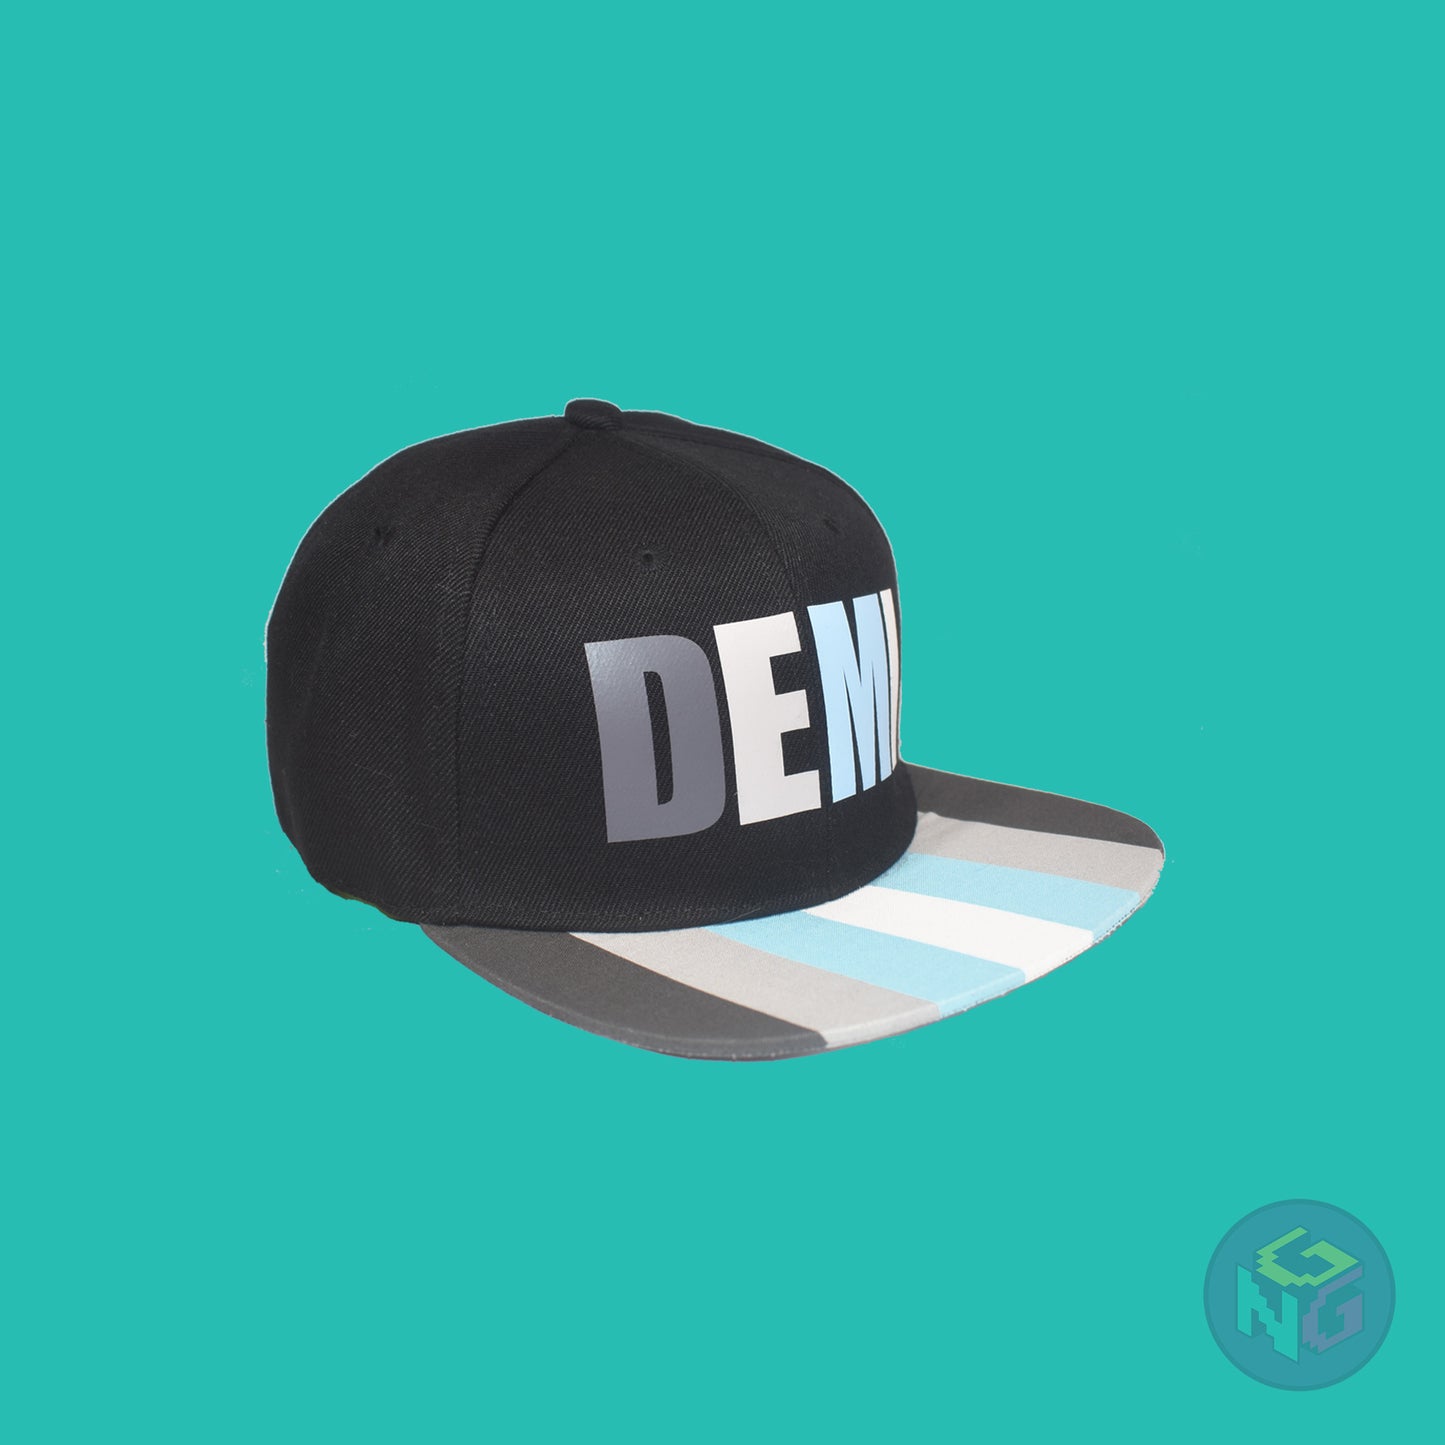 Black flat bill snapback hat. The brim has the demiboy pride flag on both sides and the front of the hat has the word “DEMI” in dark grey, light grey, blue, and white. Front right view